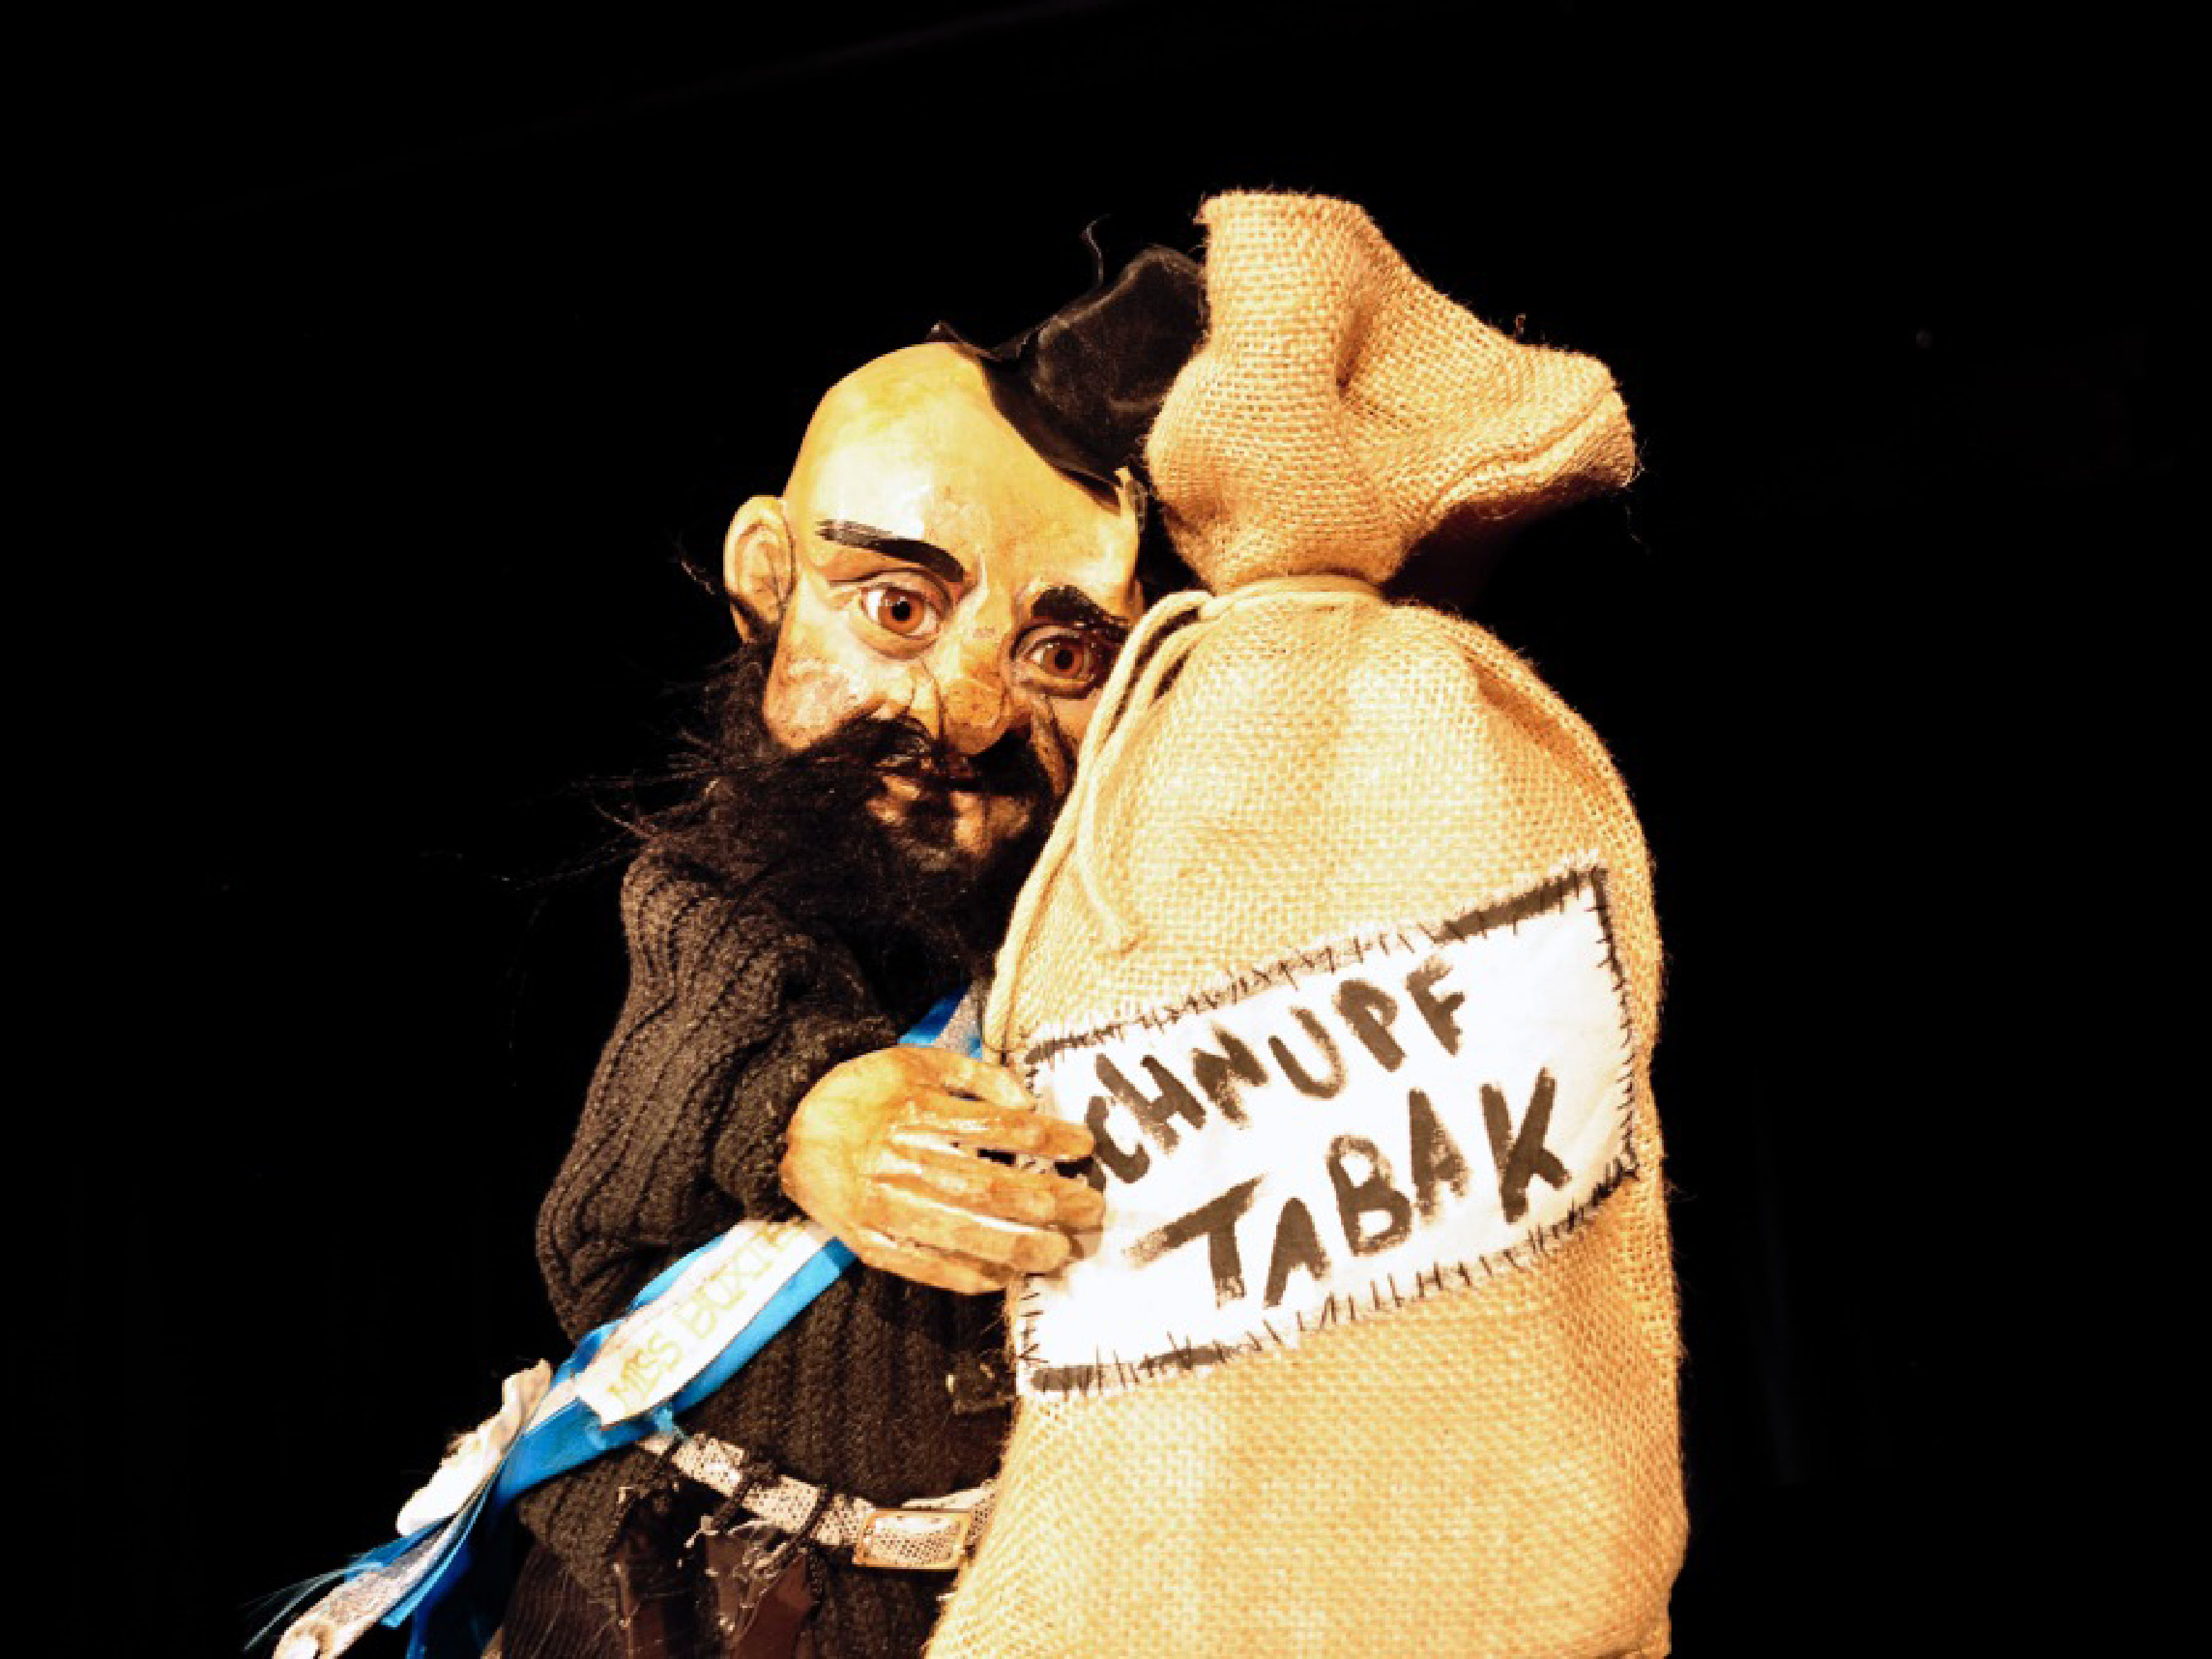 The puppet of the robber Hotzenplotz wears a black top hat on his bald head. He is hugging a bag labeled Snuff.